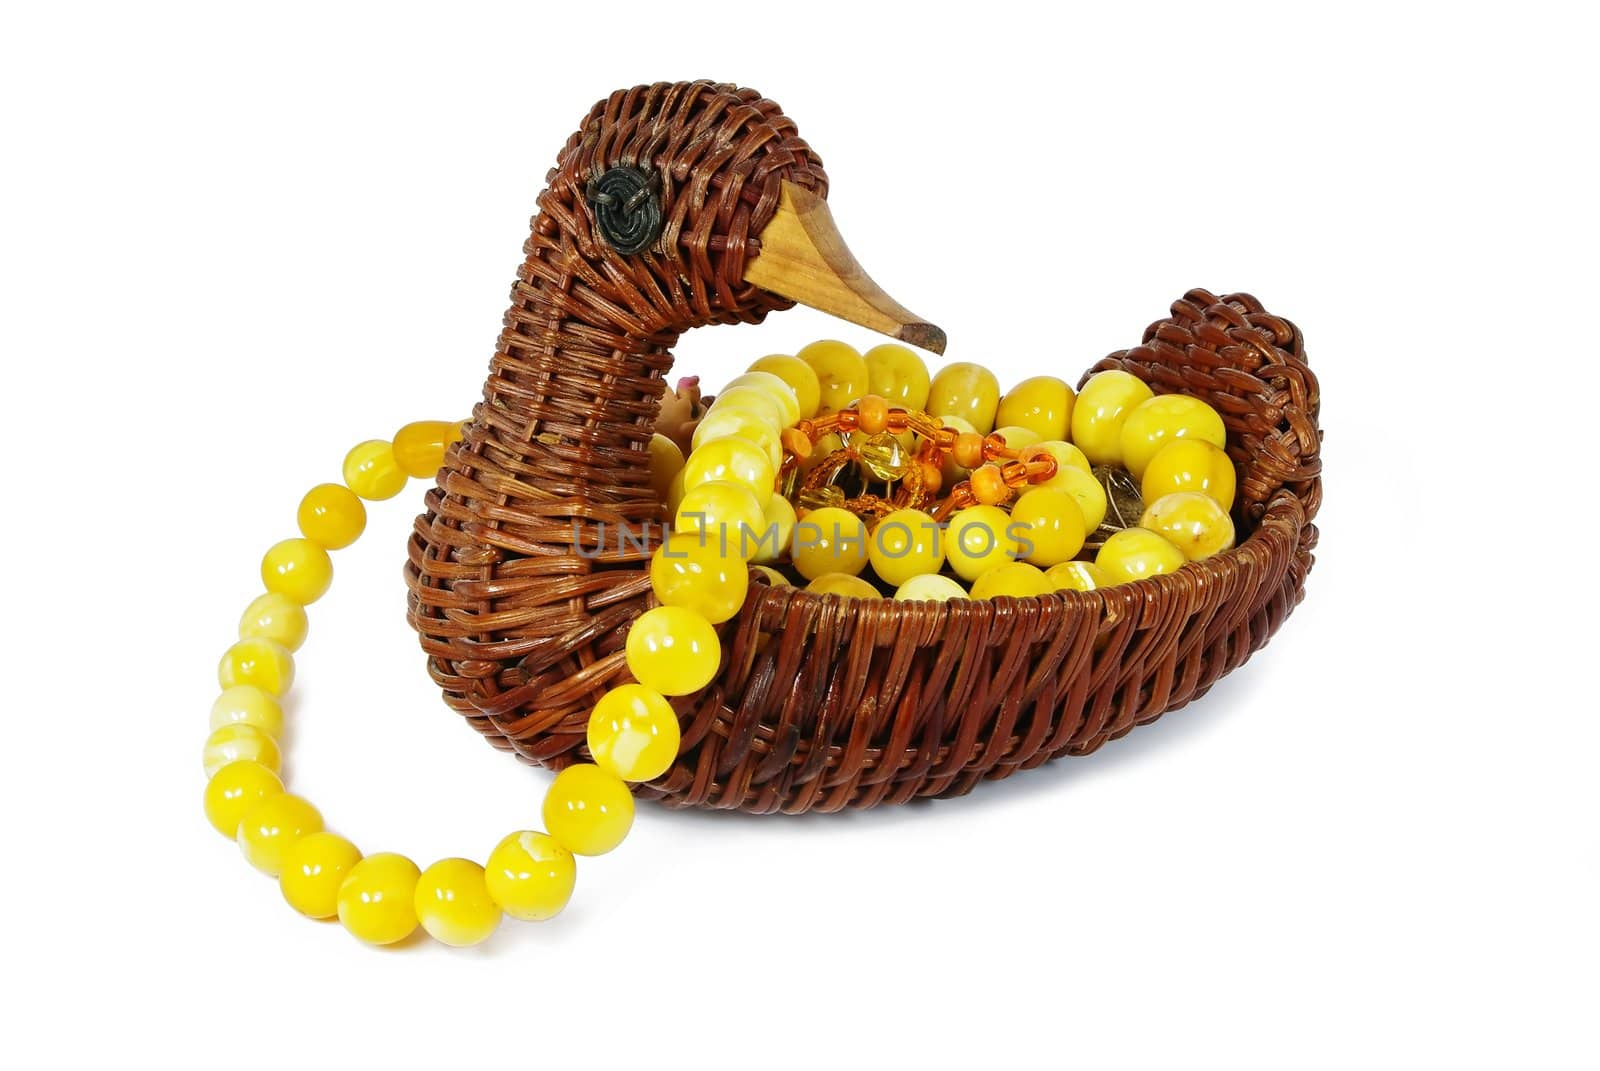 Wicker container in form of duck with amber beads on white background